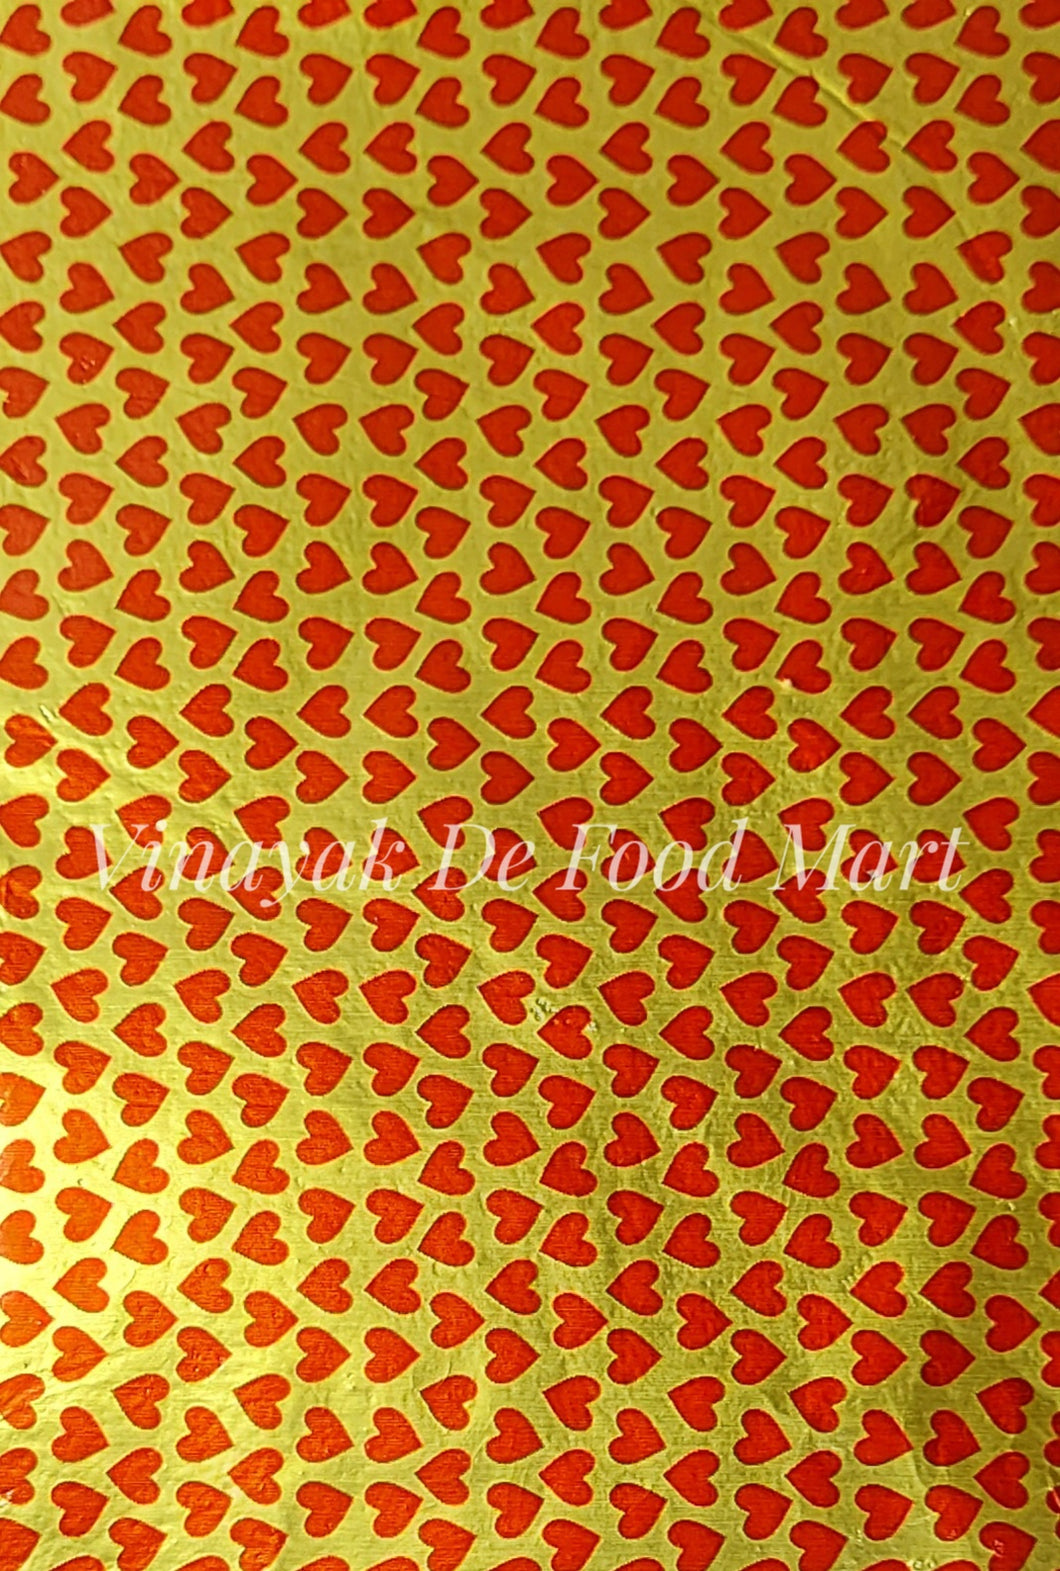 T44 Golden & Red Hearts Large Wrapping Paper